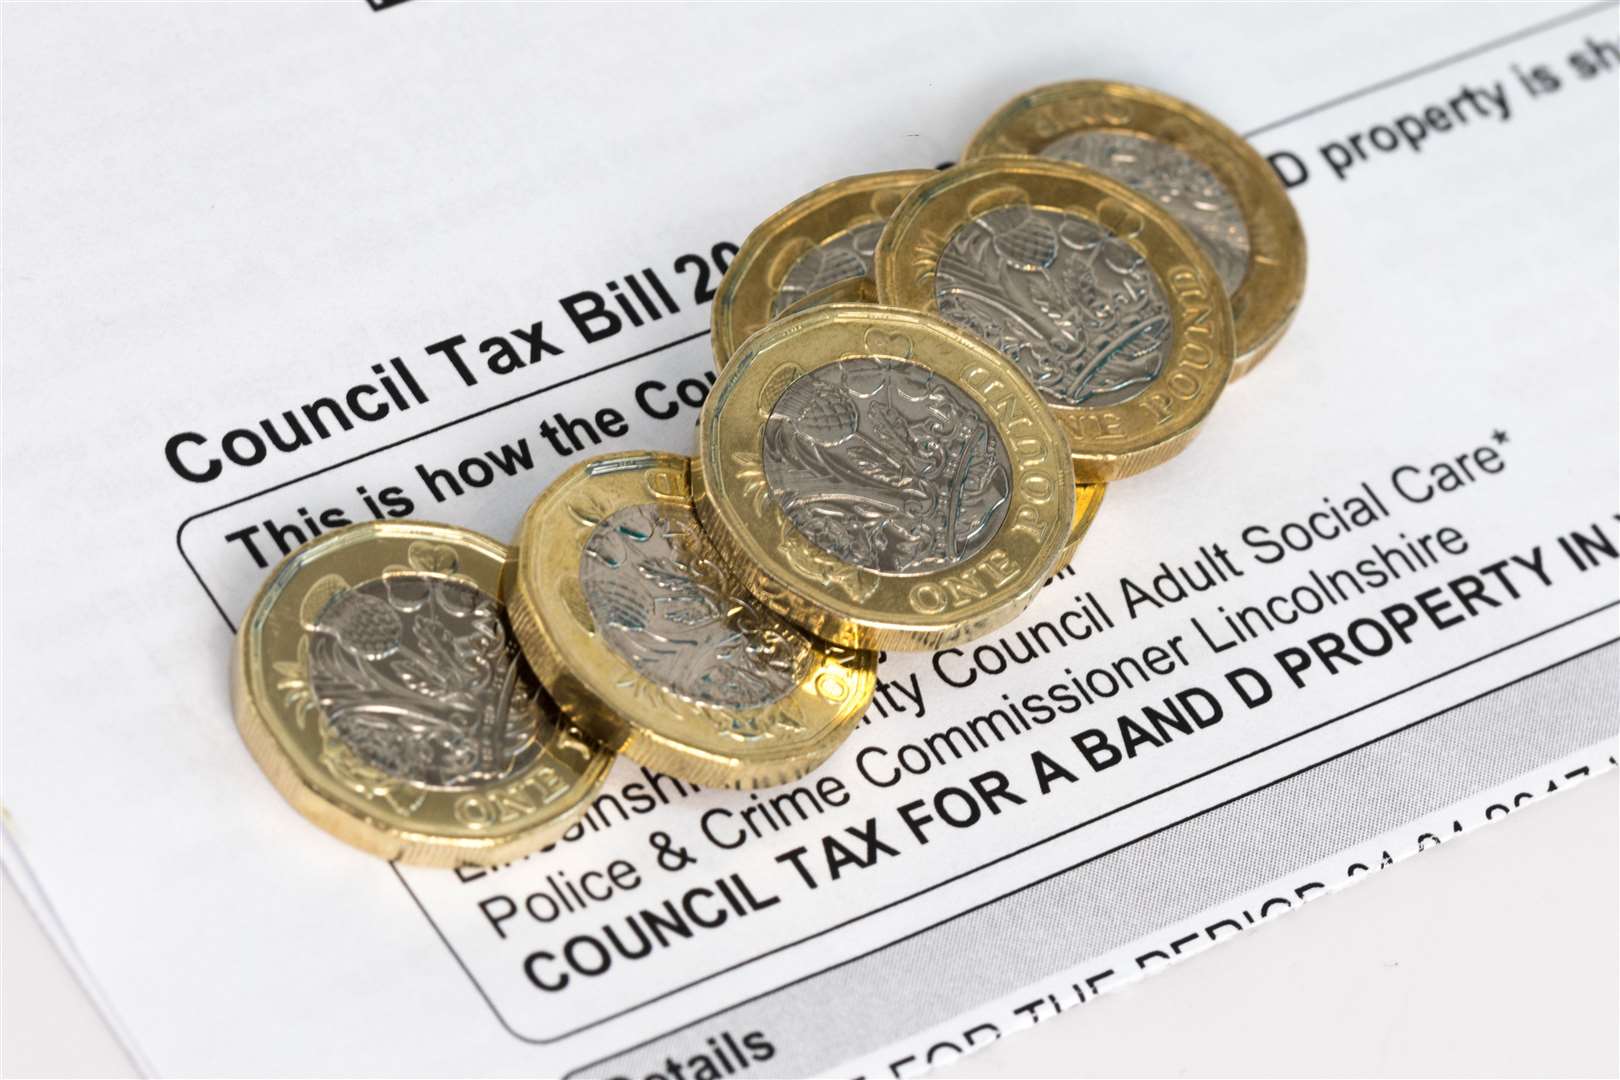 Council tax letters have been hitting door mats